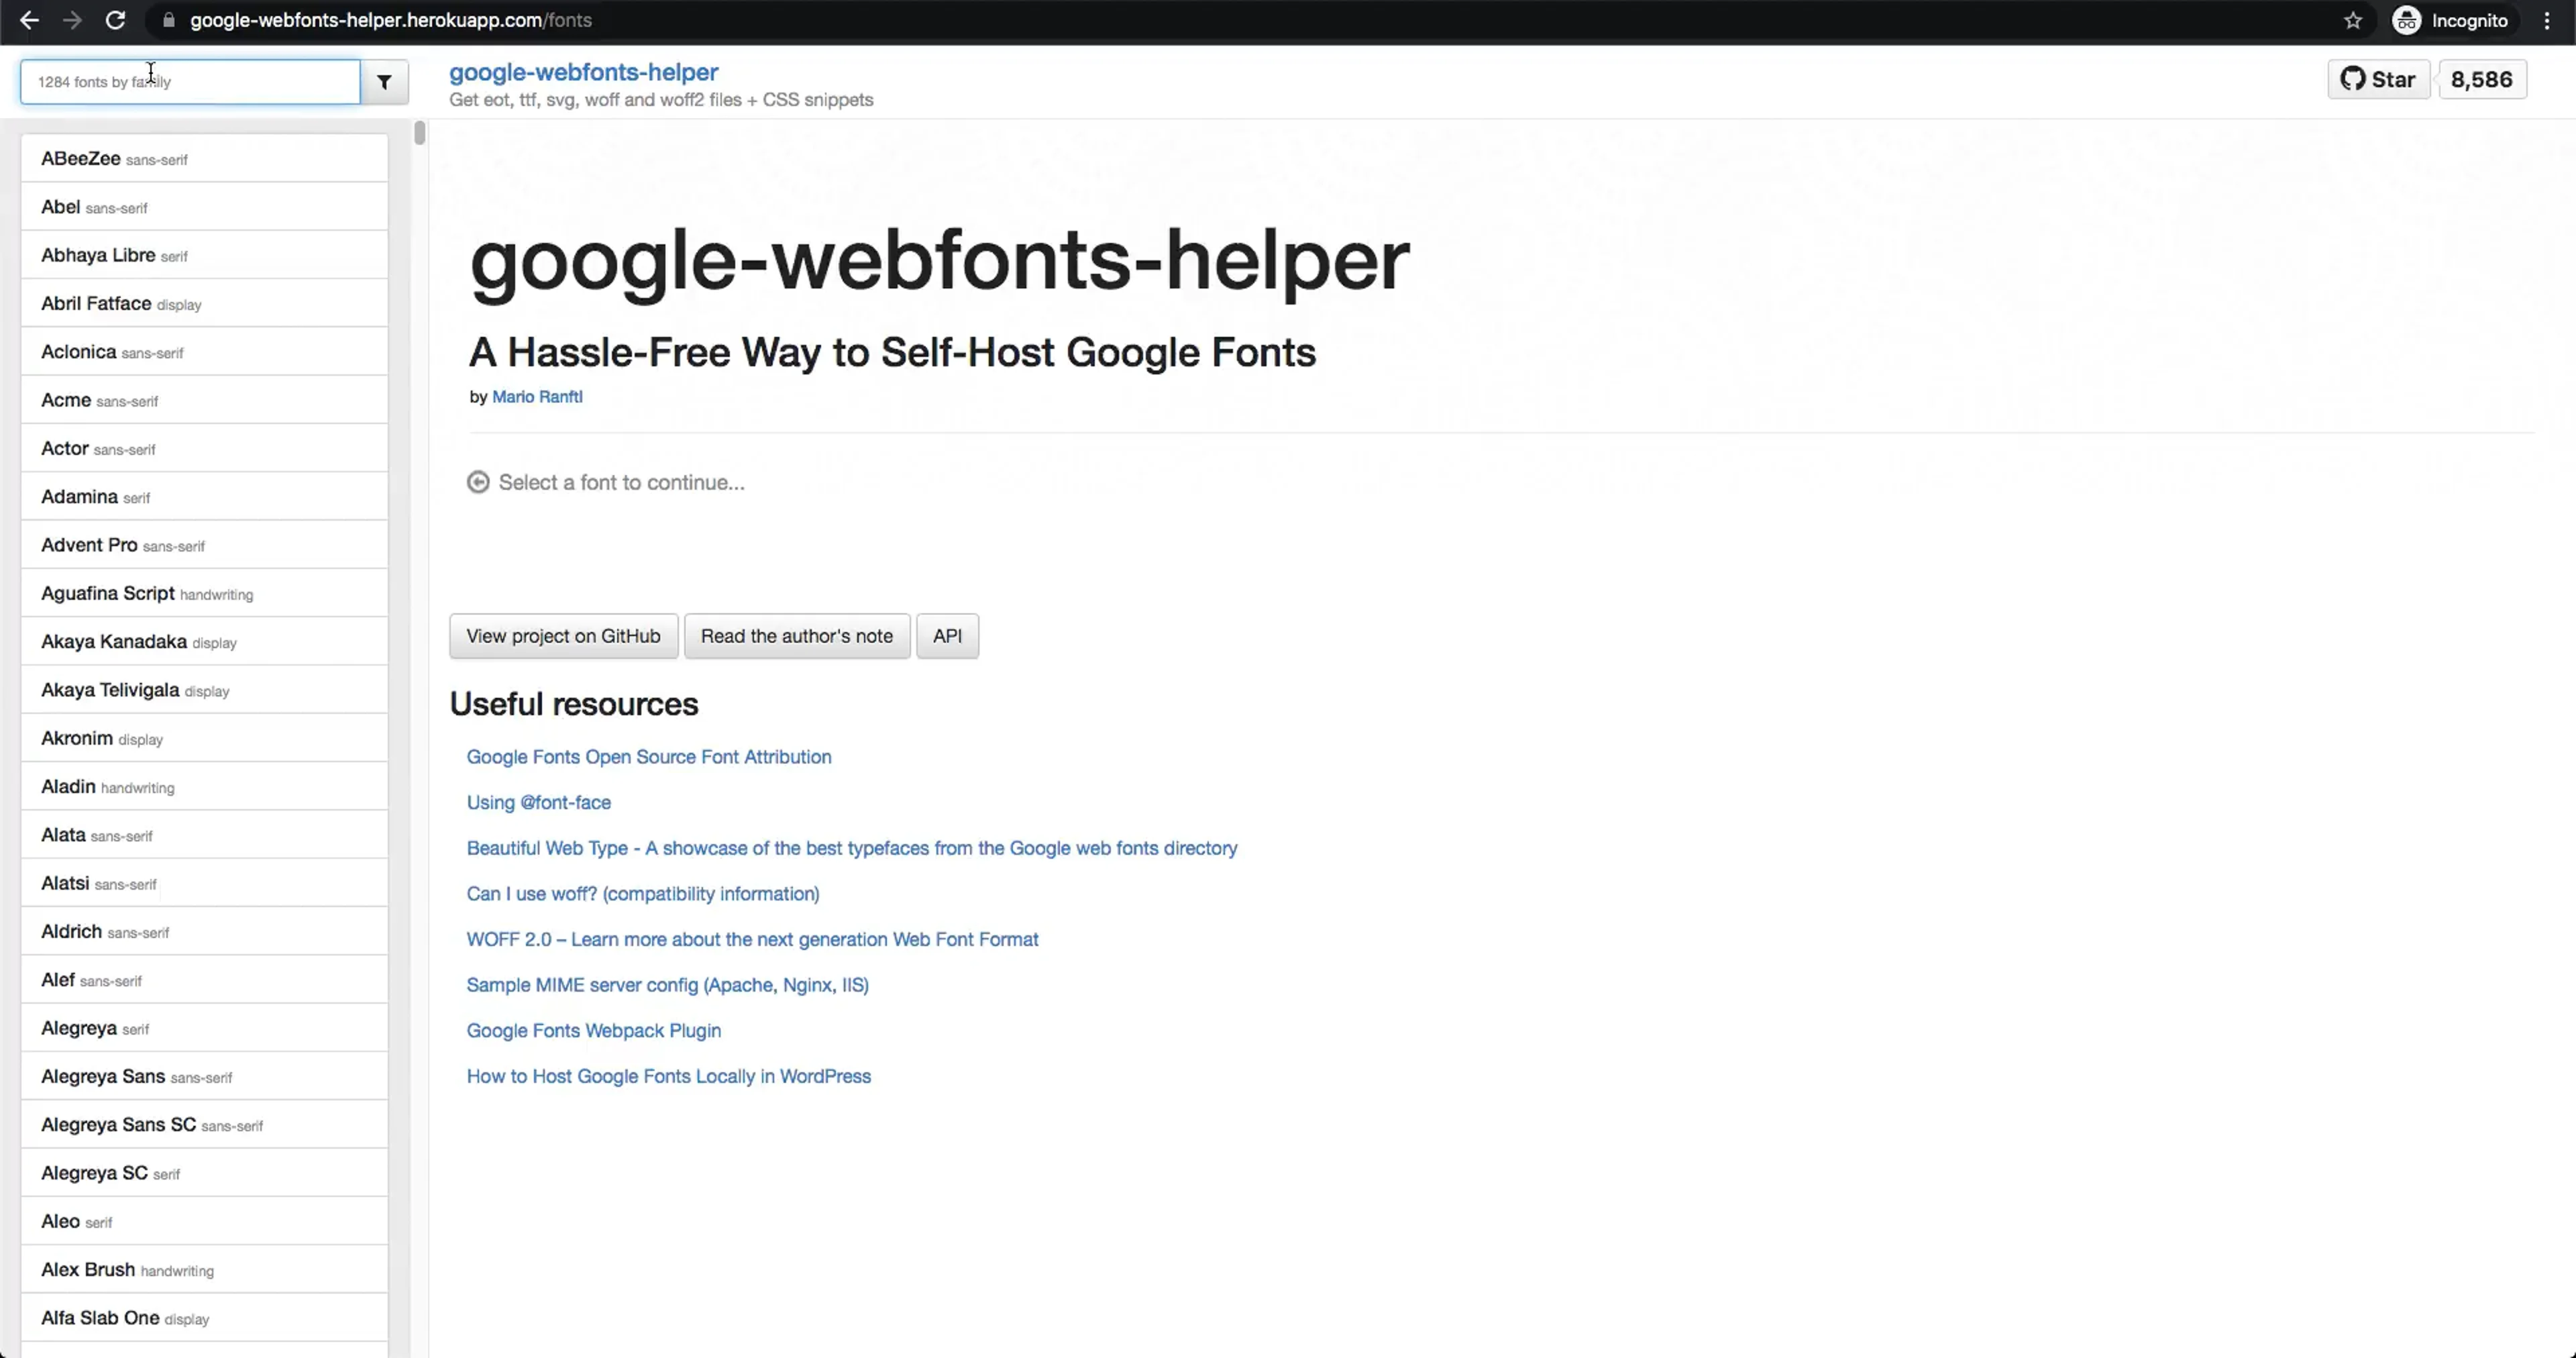 Video showing how to download woff/woff2 fonts using Google Web Fonts Helper